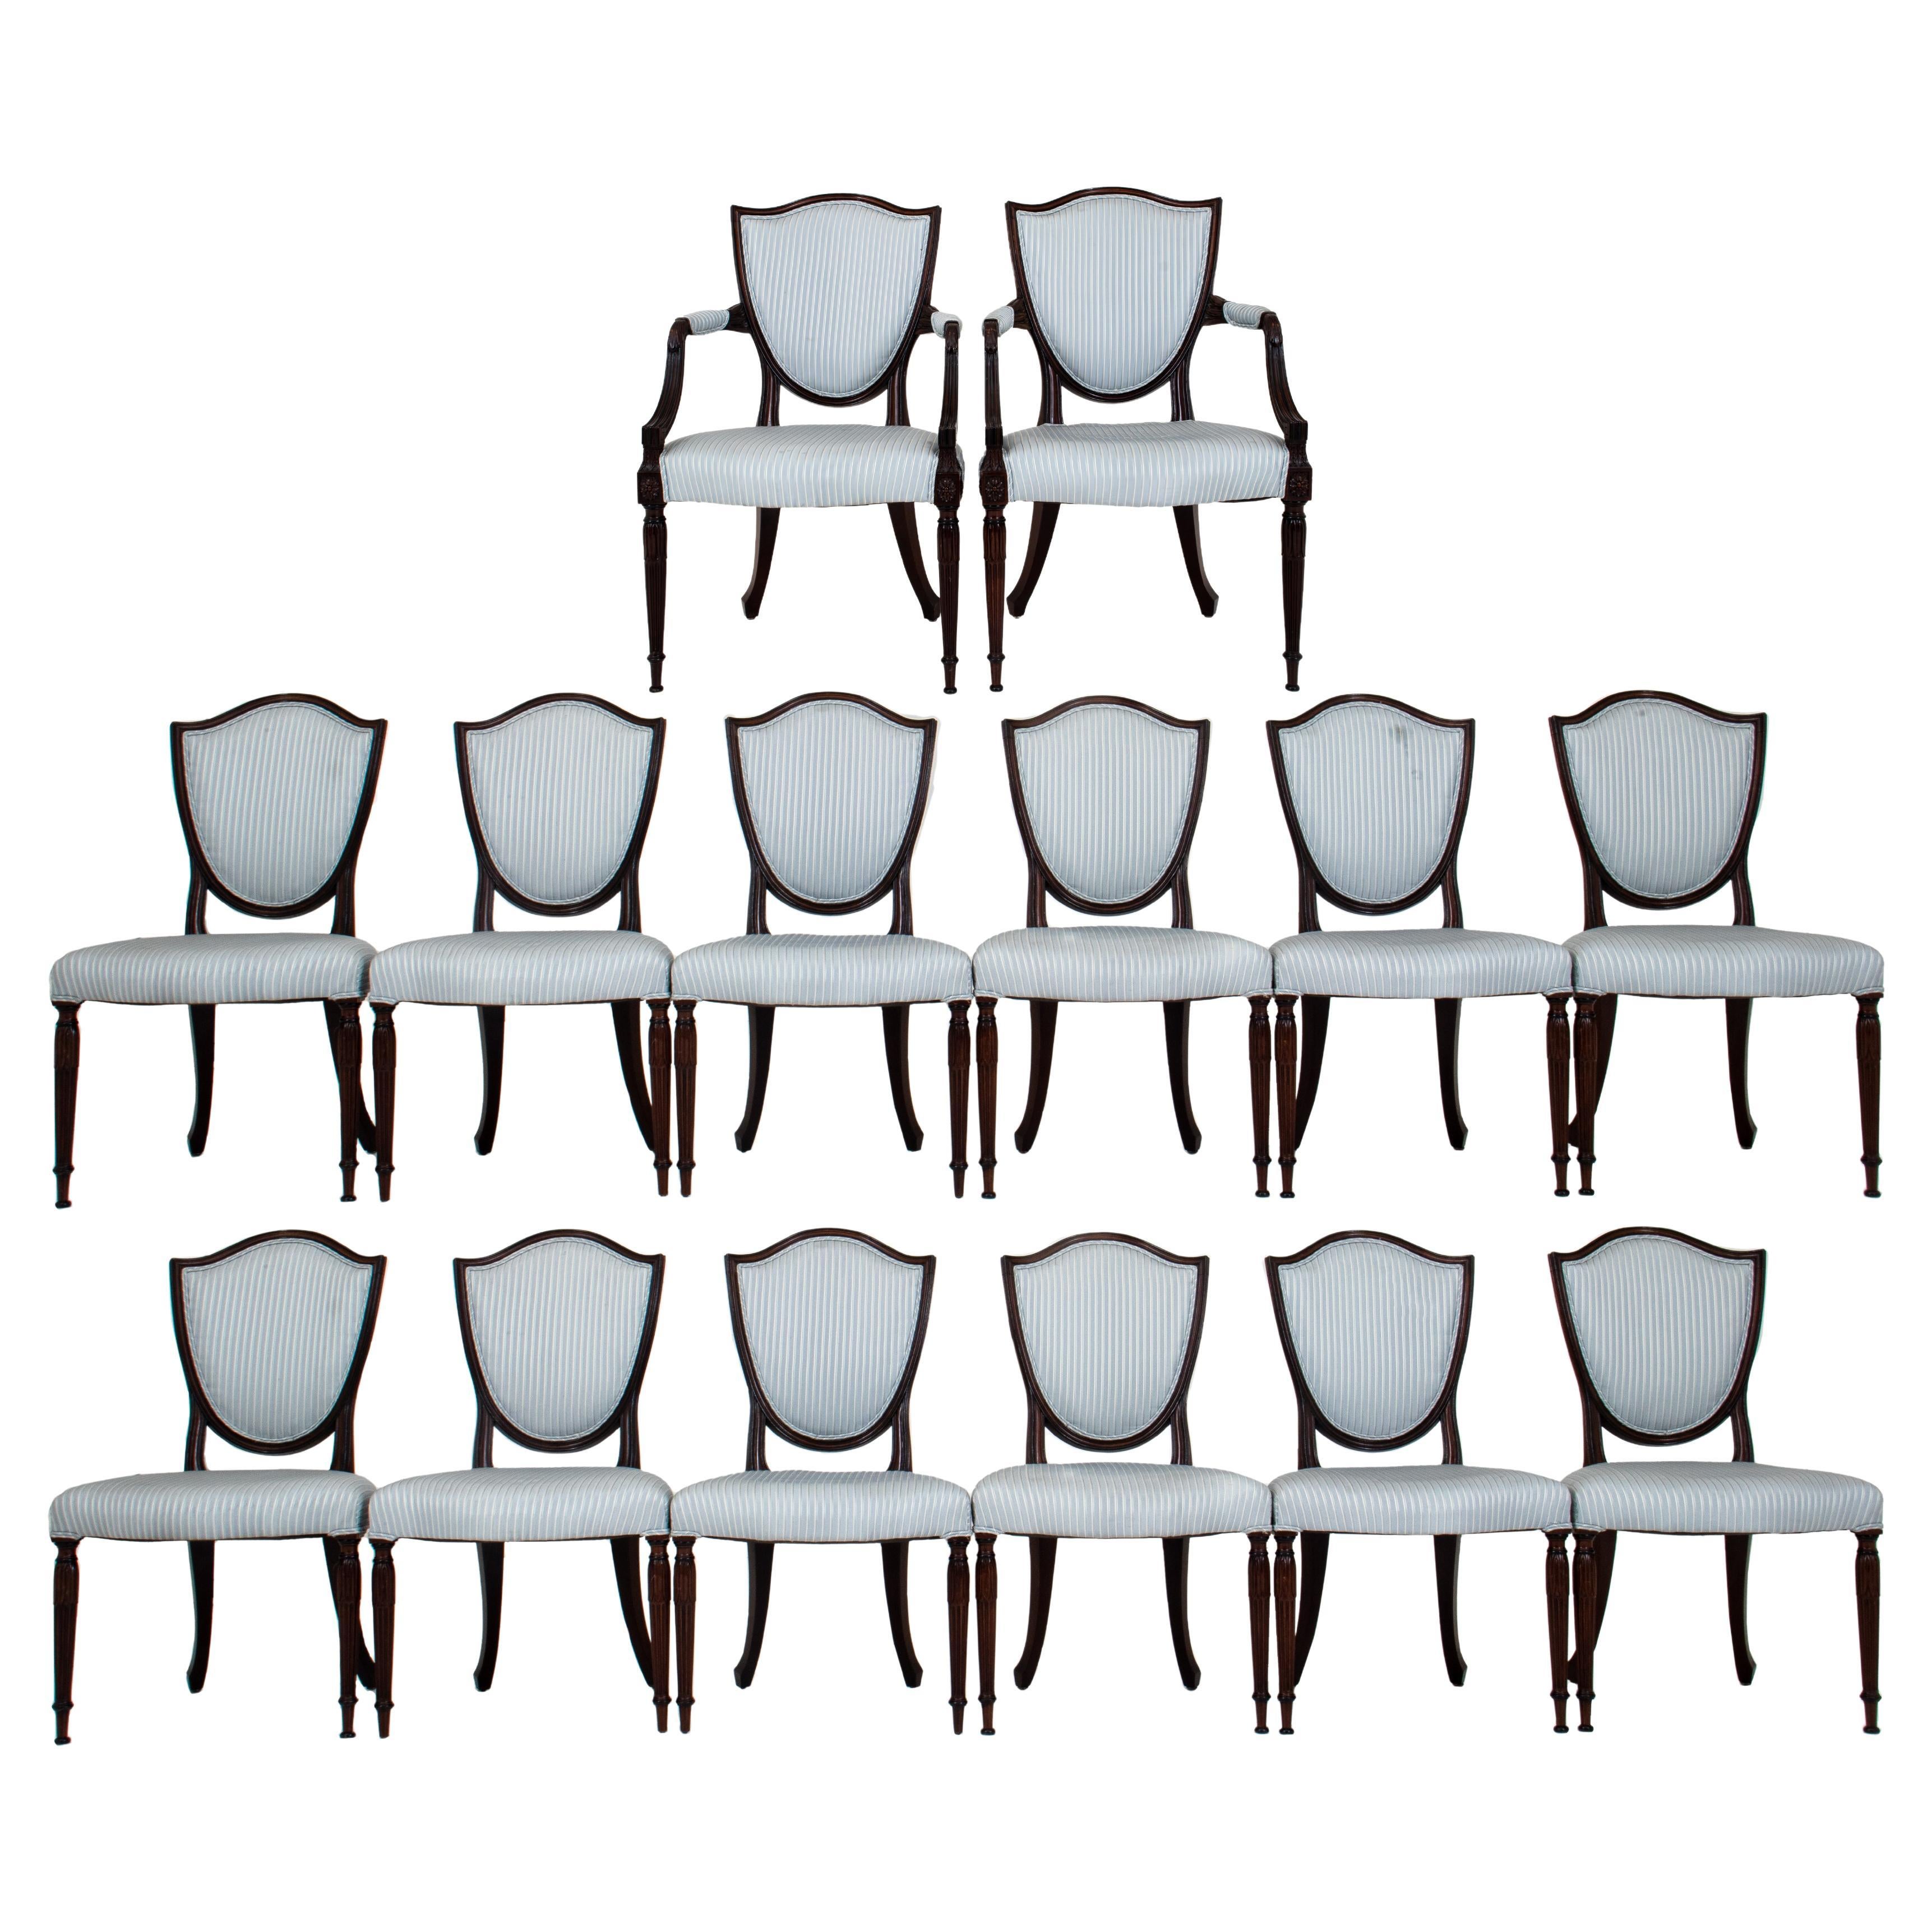 Sheraton Manner Shield-Back Dining Chairs, 14